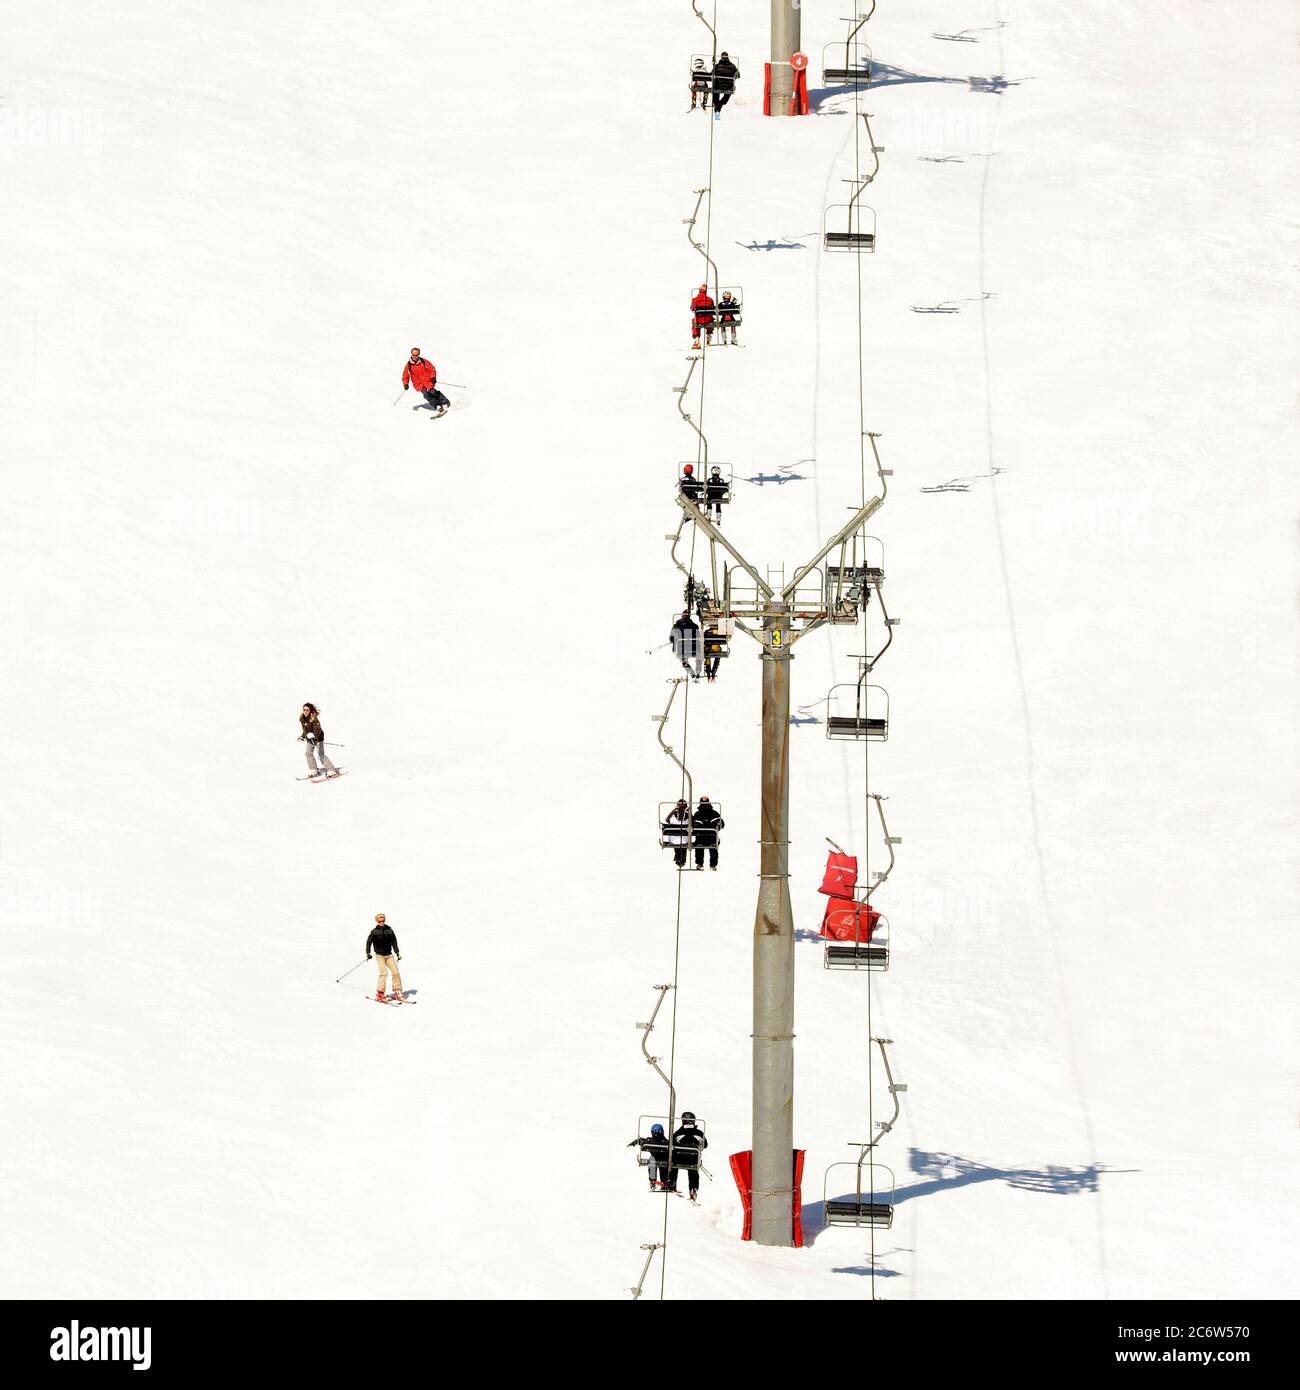 Chairlift in a ski resort, Auvergne-Rhone-Alpes, France Stock Photo